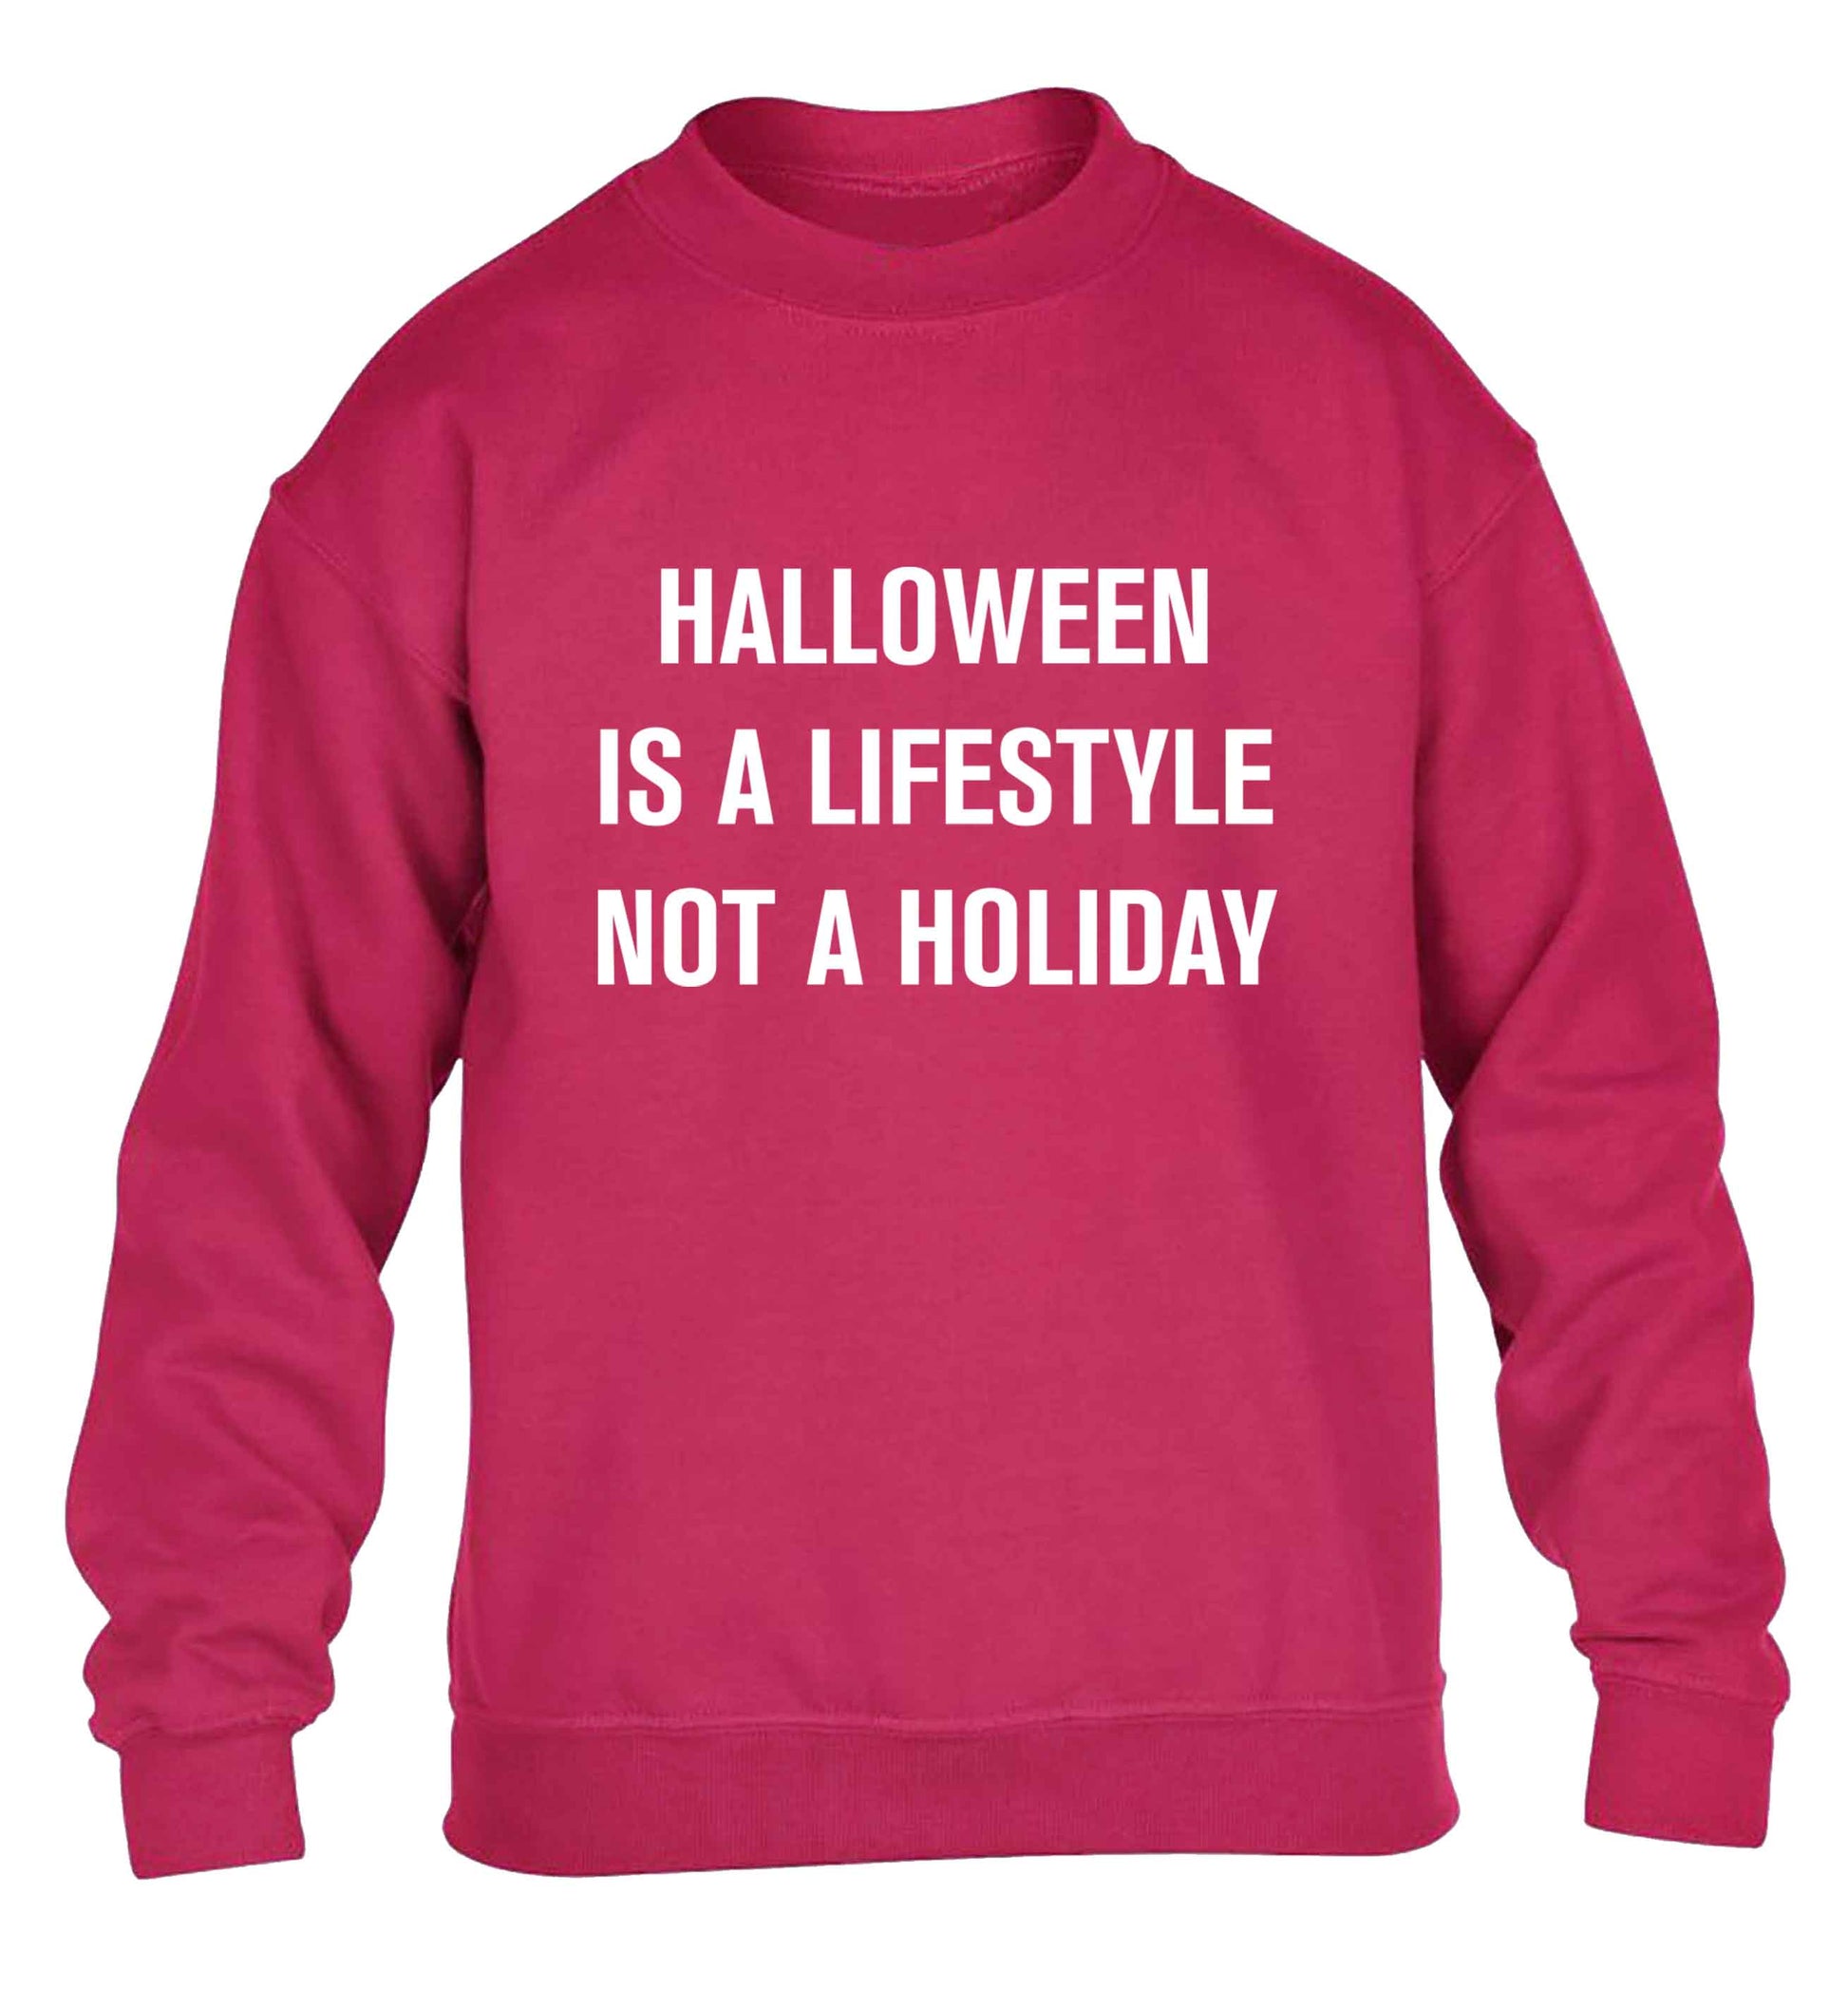 Halloween is a lifestyle not a holiday children's pink sweater 12-13 Years